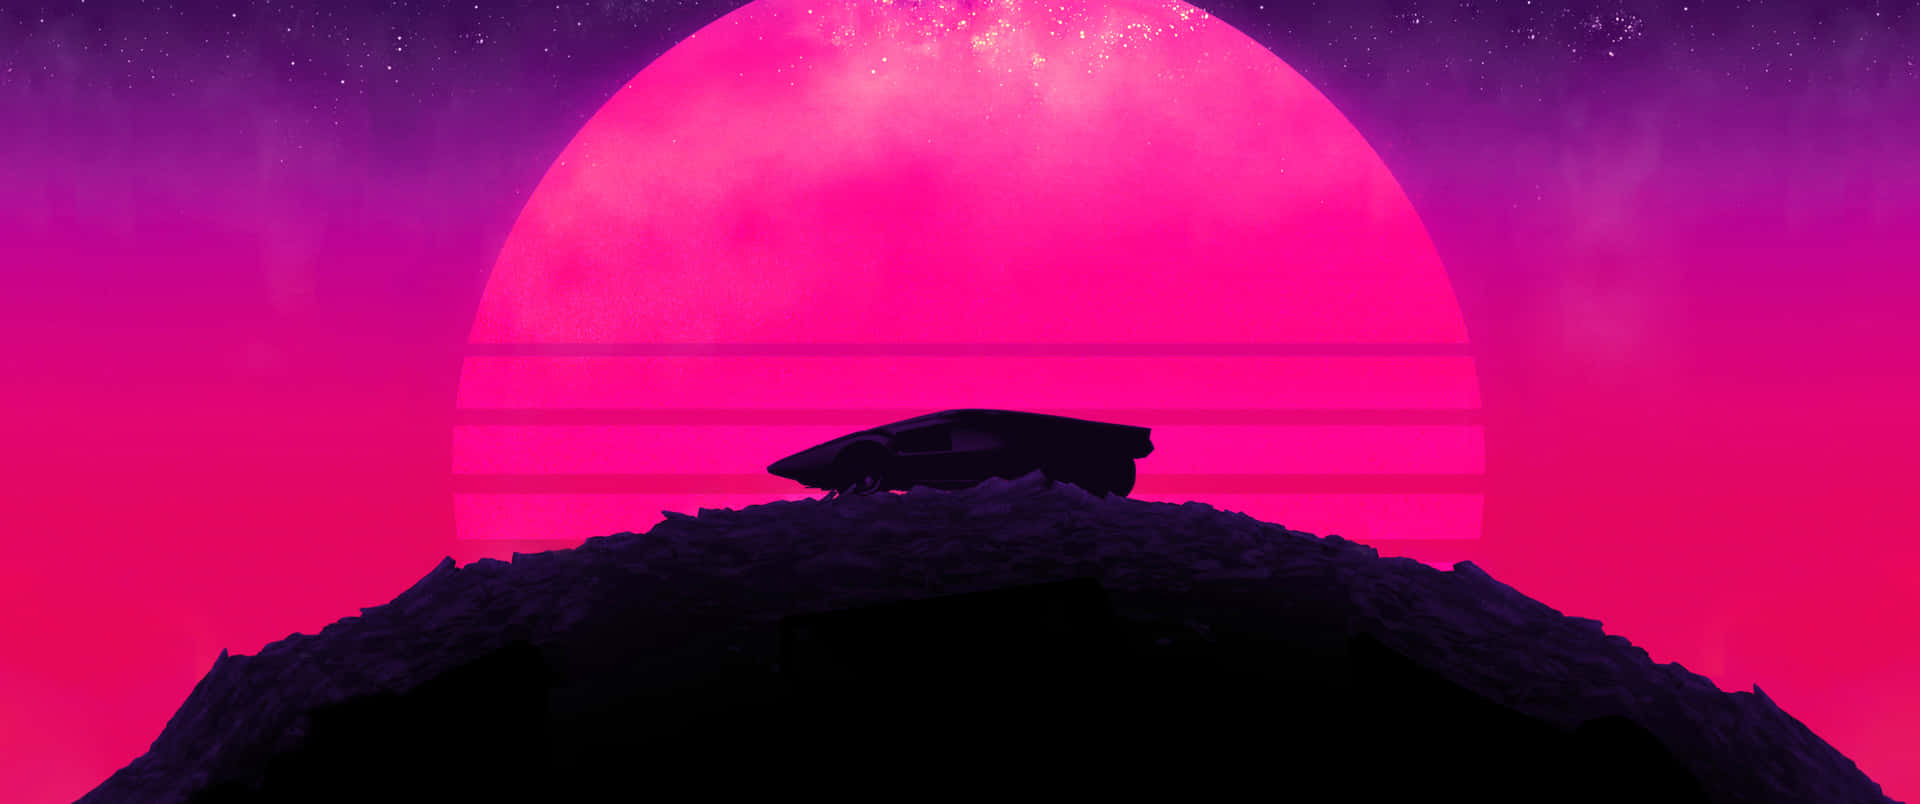 A Pink And Purple Sky With A Mountain In The Background Wallpaper